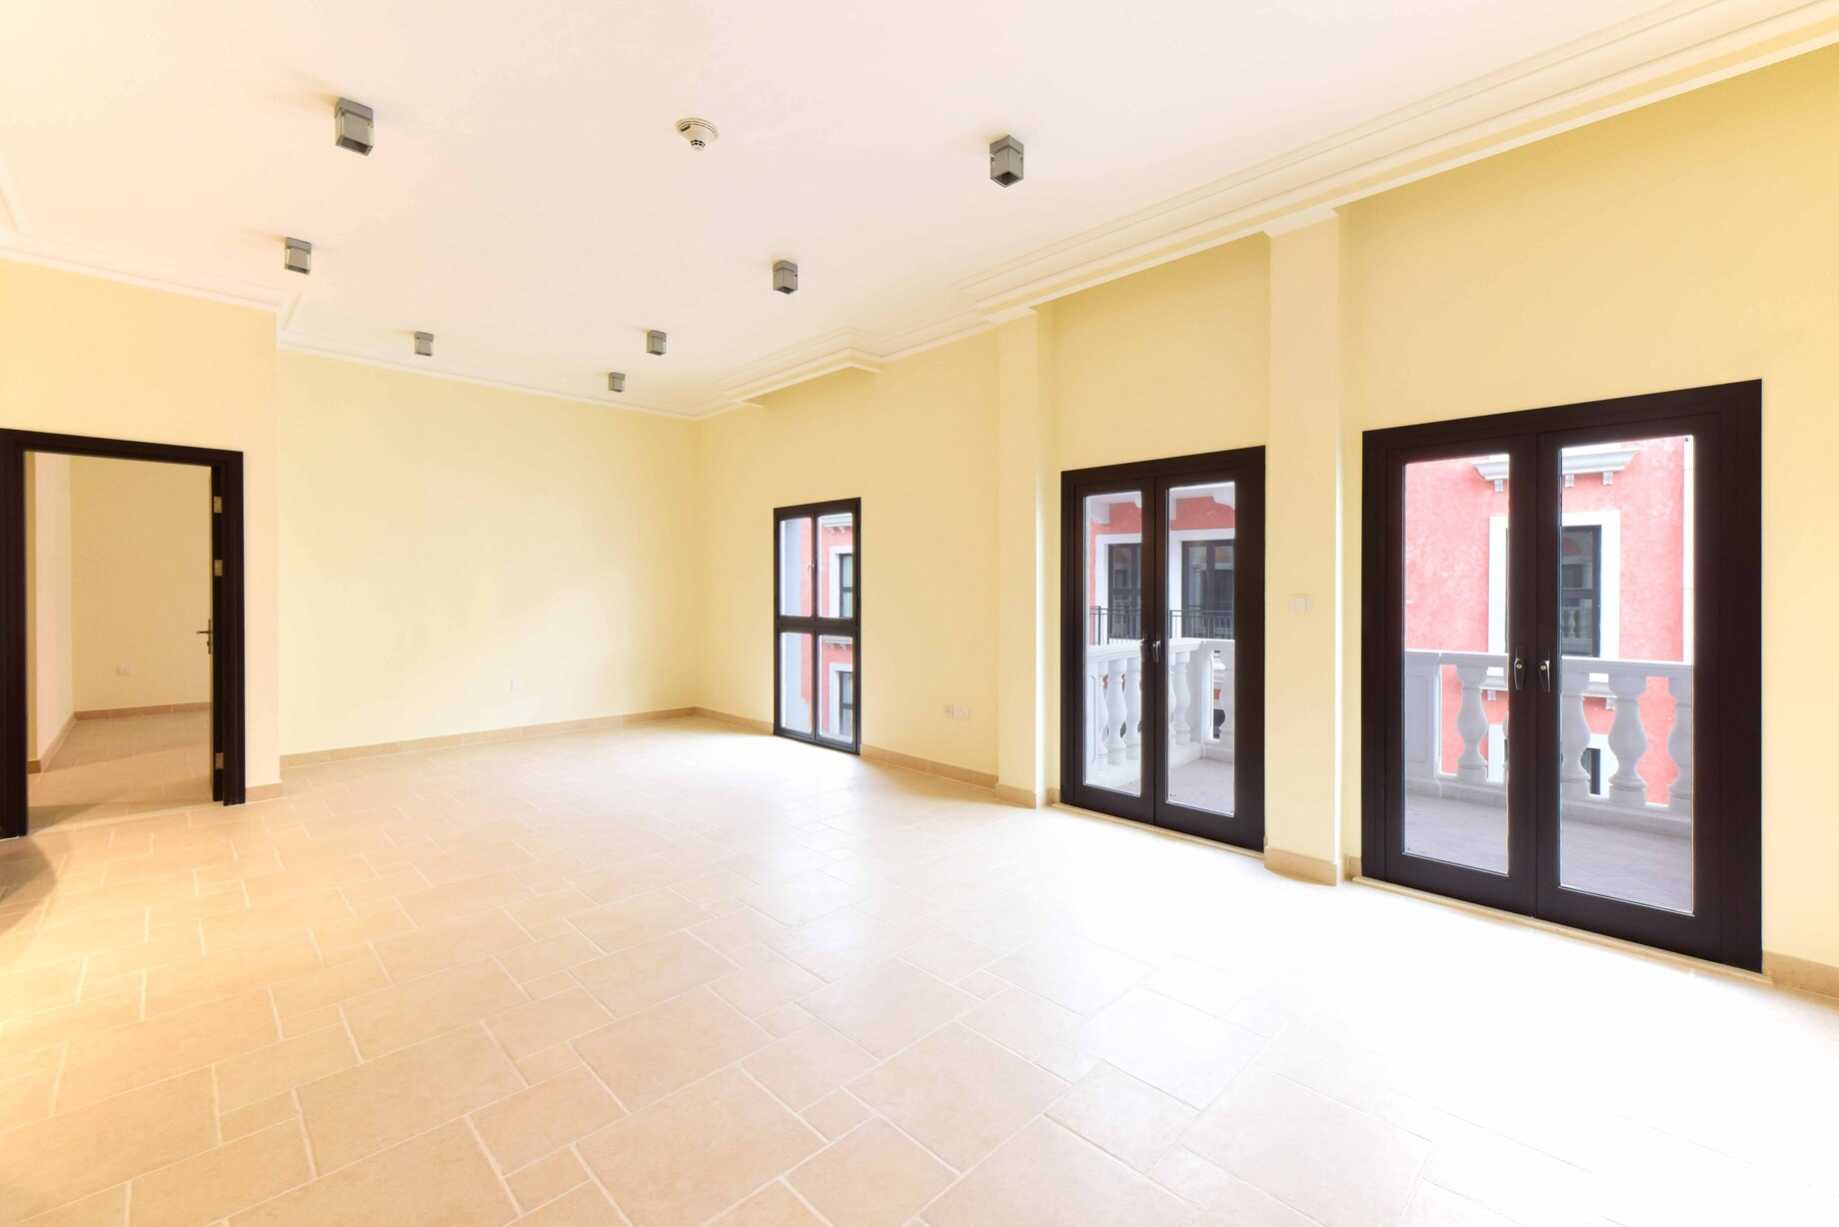 25 Spaces Real Estate - Qanat Quartier - Properties for Sale - 13th October 2021 ref6500 (4)